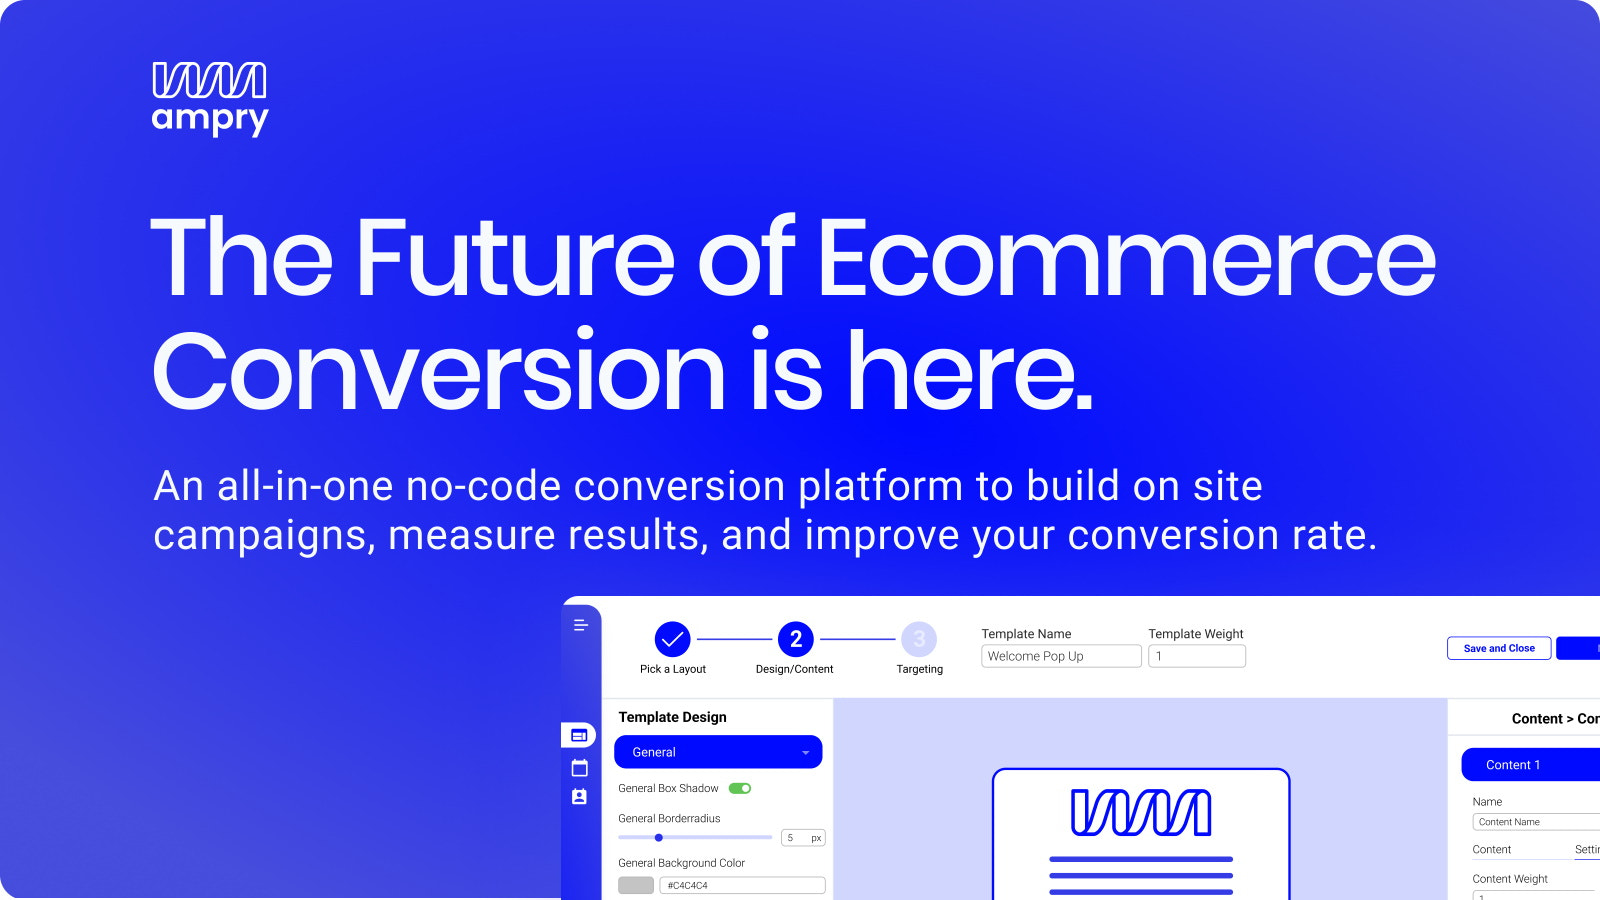 The Future of Ecommerce Conversion is here.